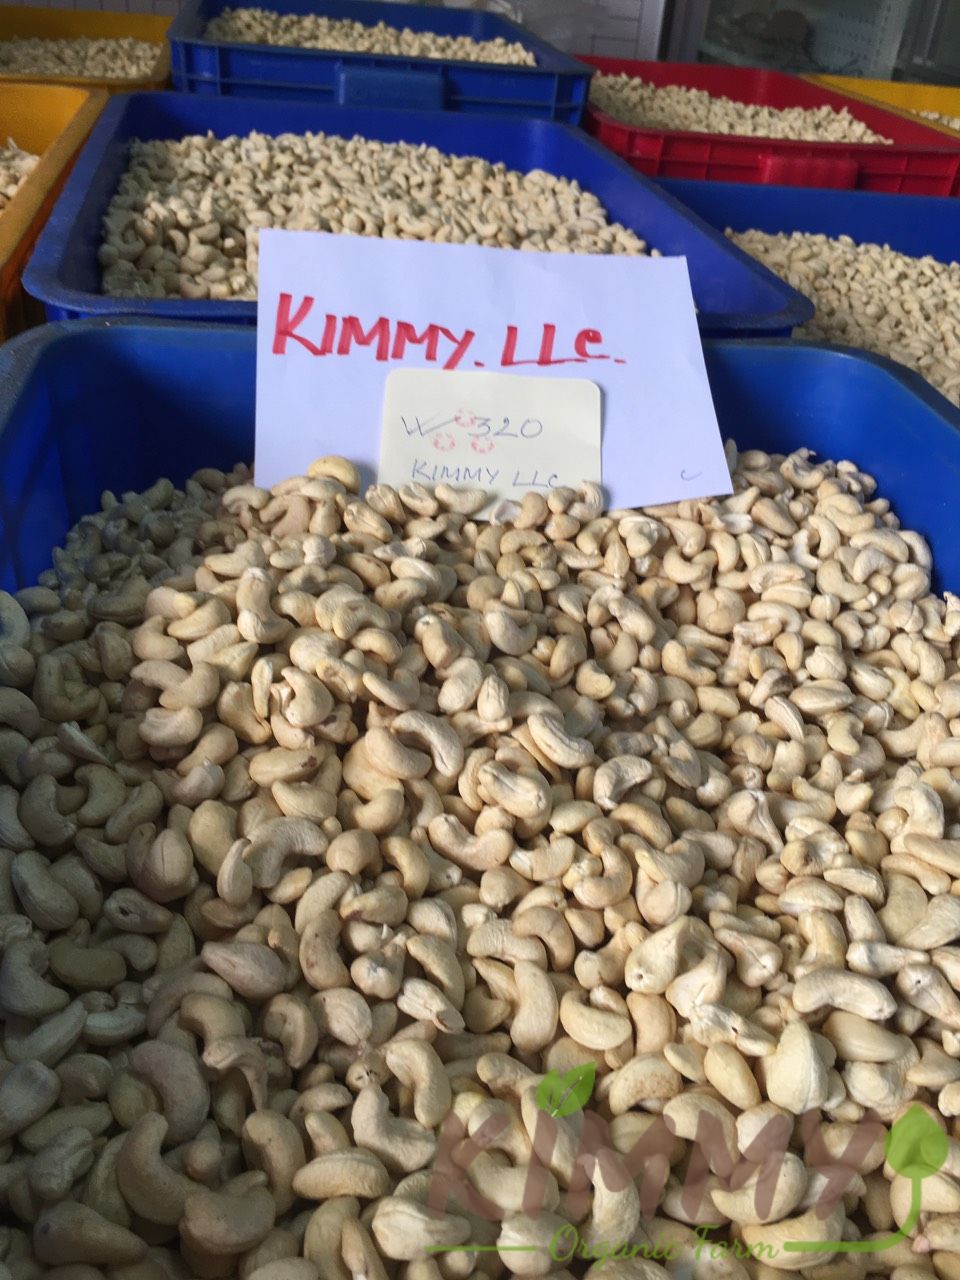 Vietnam W320 Cashew Nut White Whole Cashews High-Quality Ready For Export - Raw image of W320 From Our Cashew Factory!-15